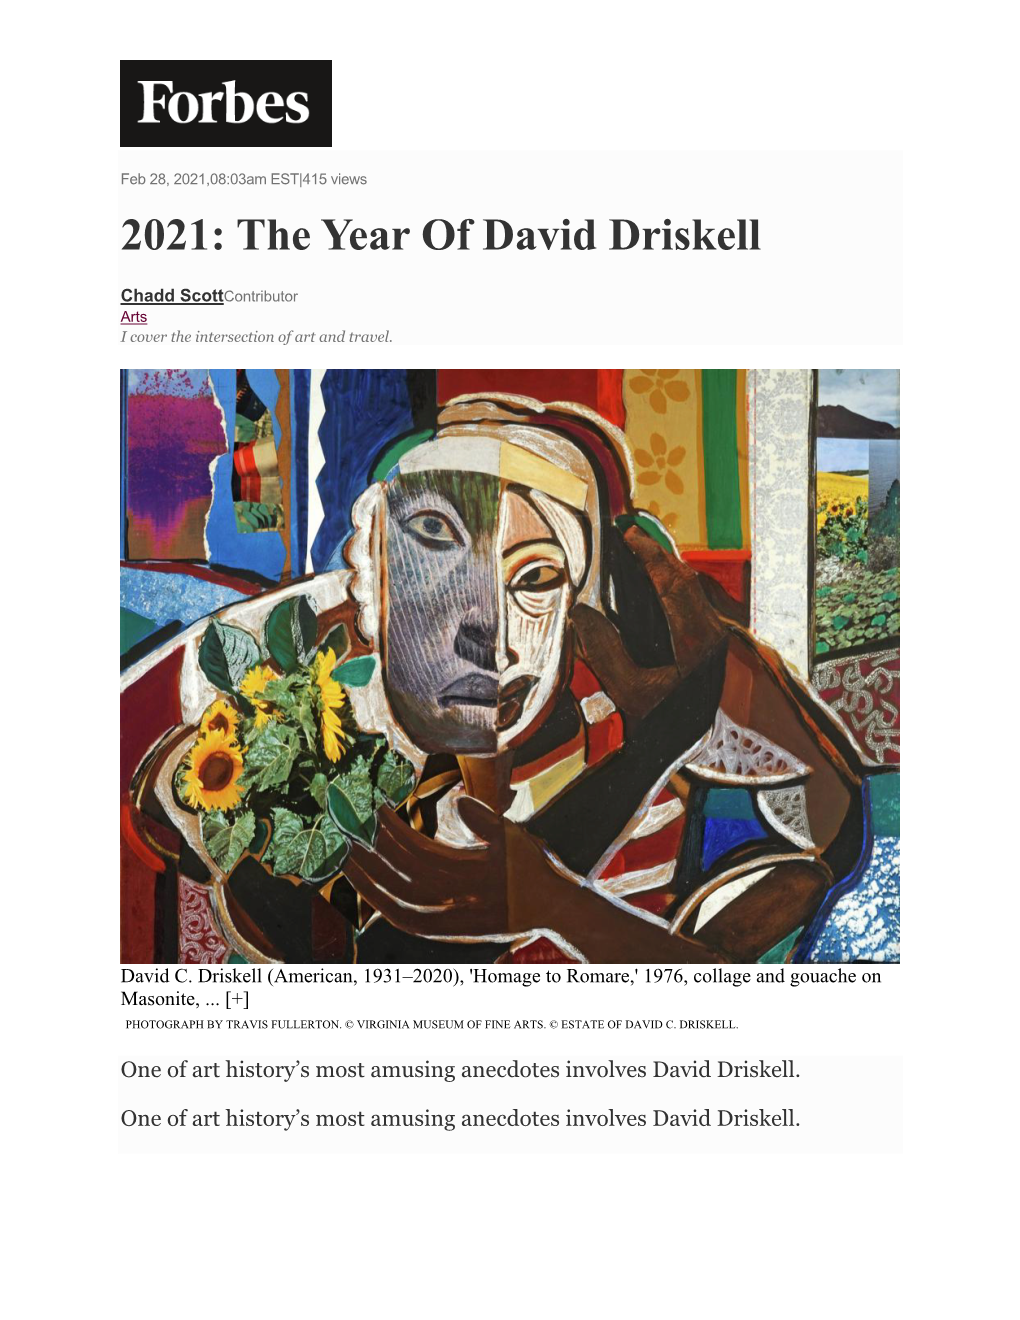 Forbes: 2021: the Year of David Driskell